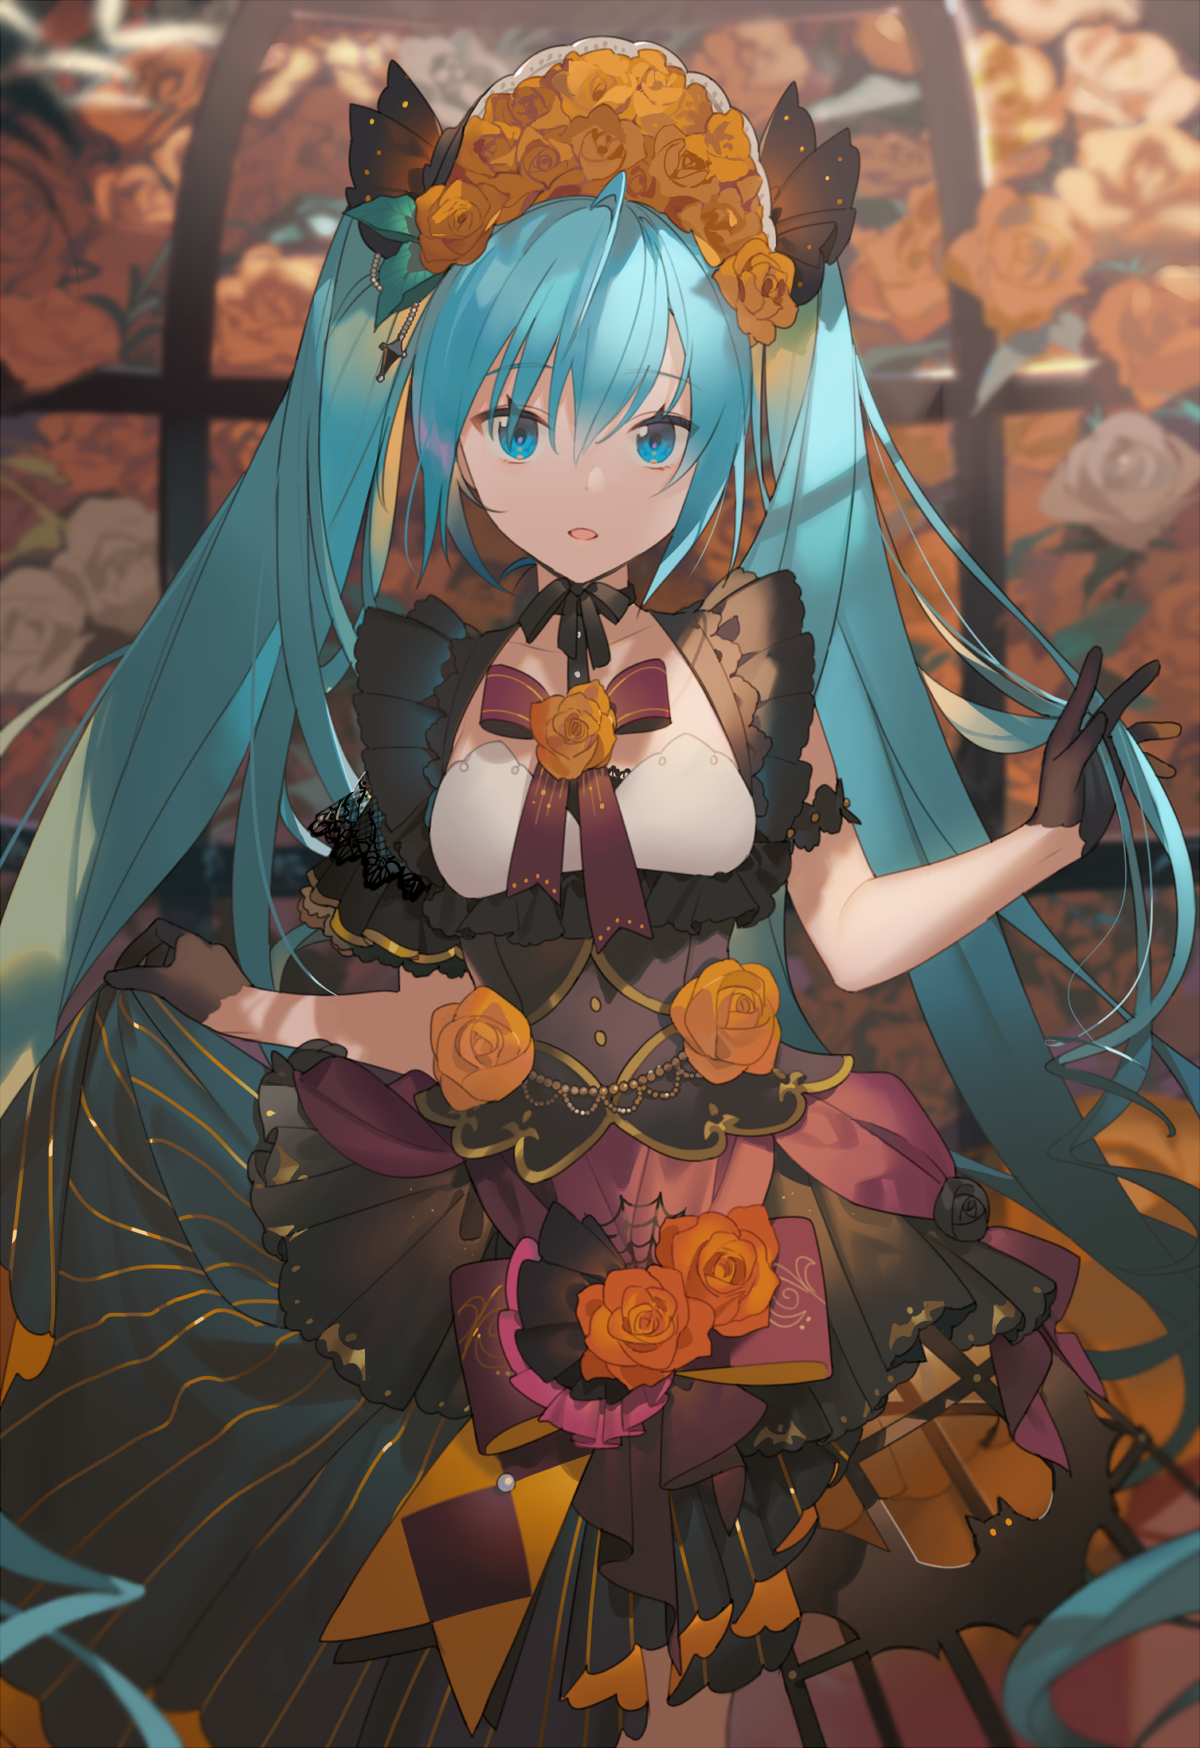 Anime 1200x1748 anime anime girls Hatsune Miku Vocaloid blue hair blue eyes portrait display dress gloves looking at viewer twintails flowers